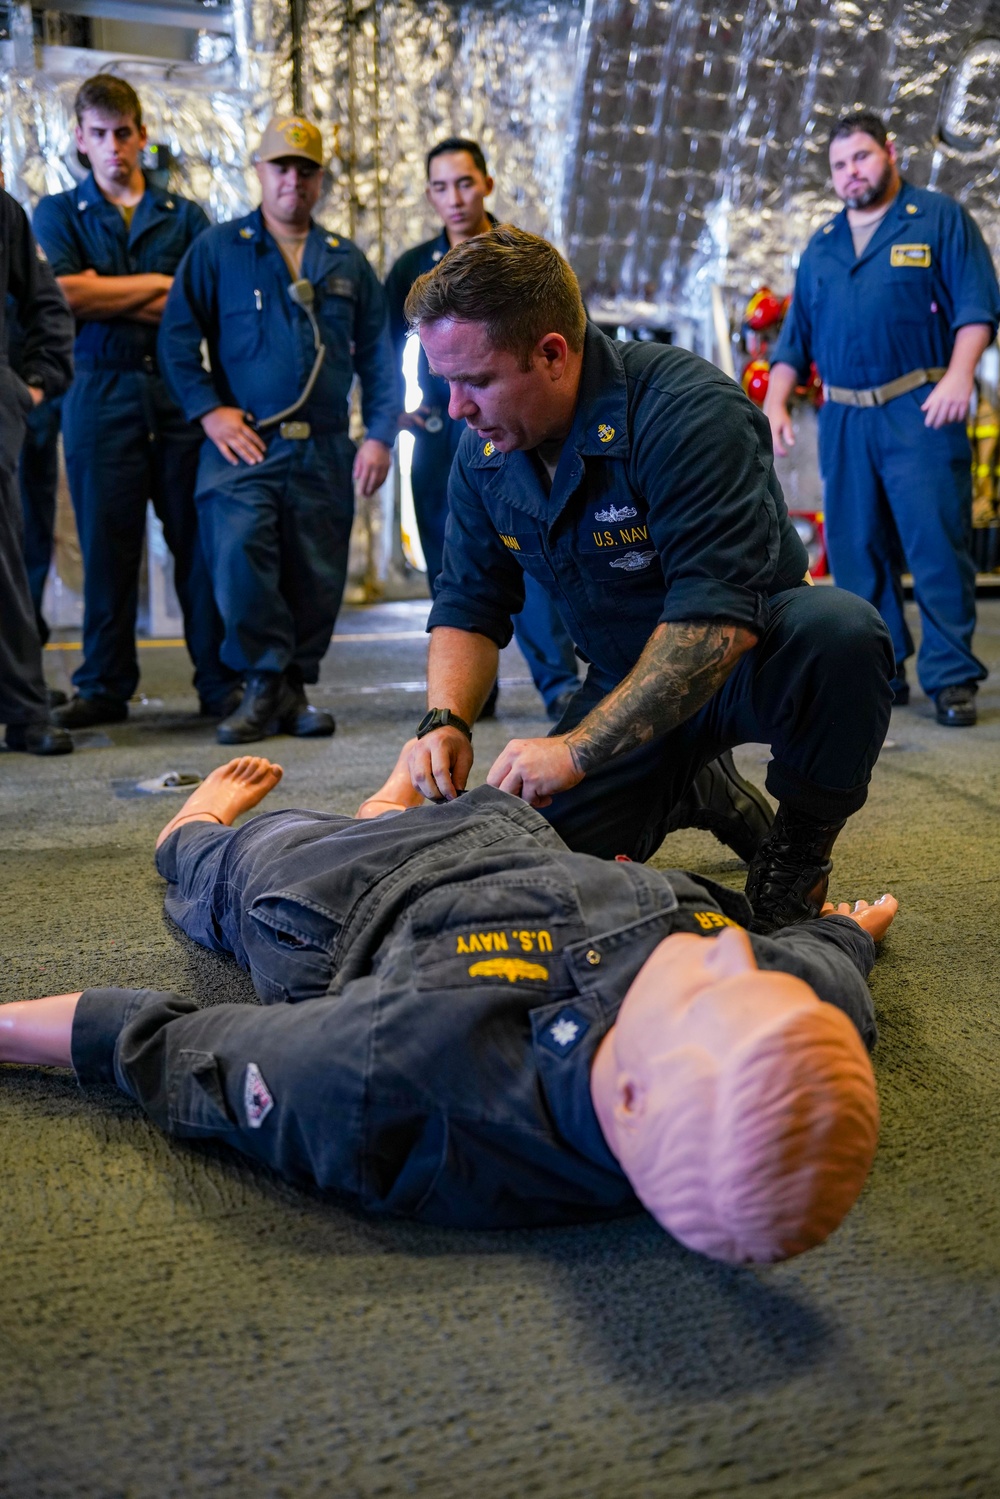 Sailors Aboard USS Oakland Conduct an Emergency Medical Readiness Training